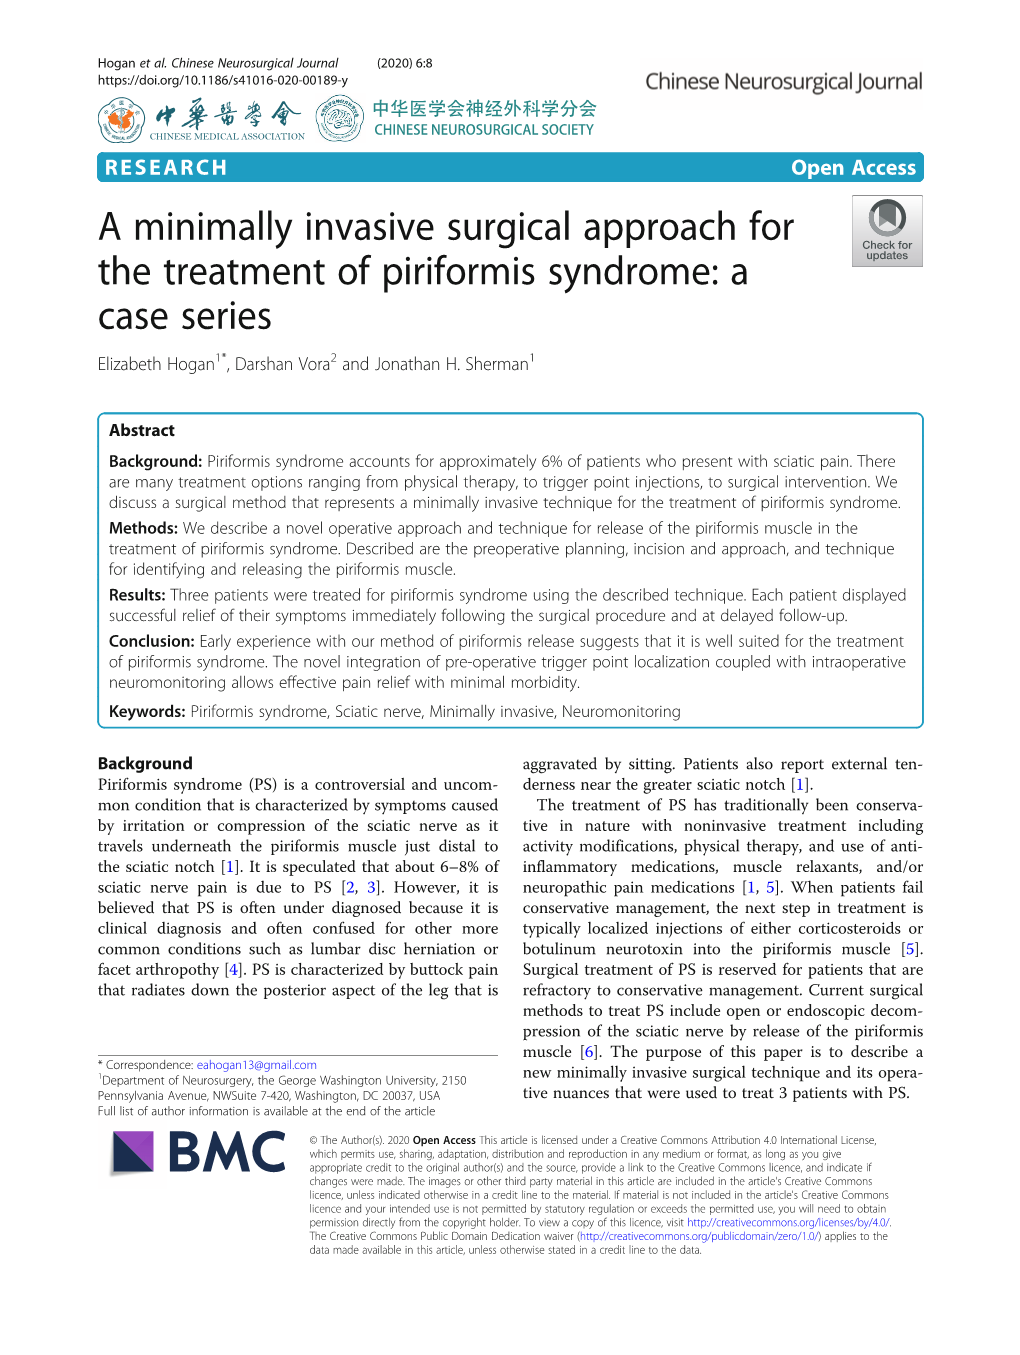 A Minimally Invasive Surgical Approach for the Treatment of Piriformis Syndrome: a Case Series Elizabeth Hogan1*, Darshan Vora2 and Jonathan H